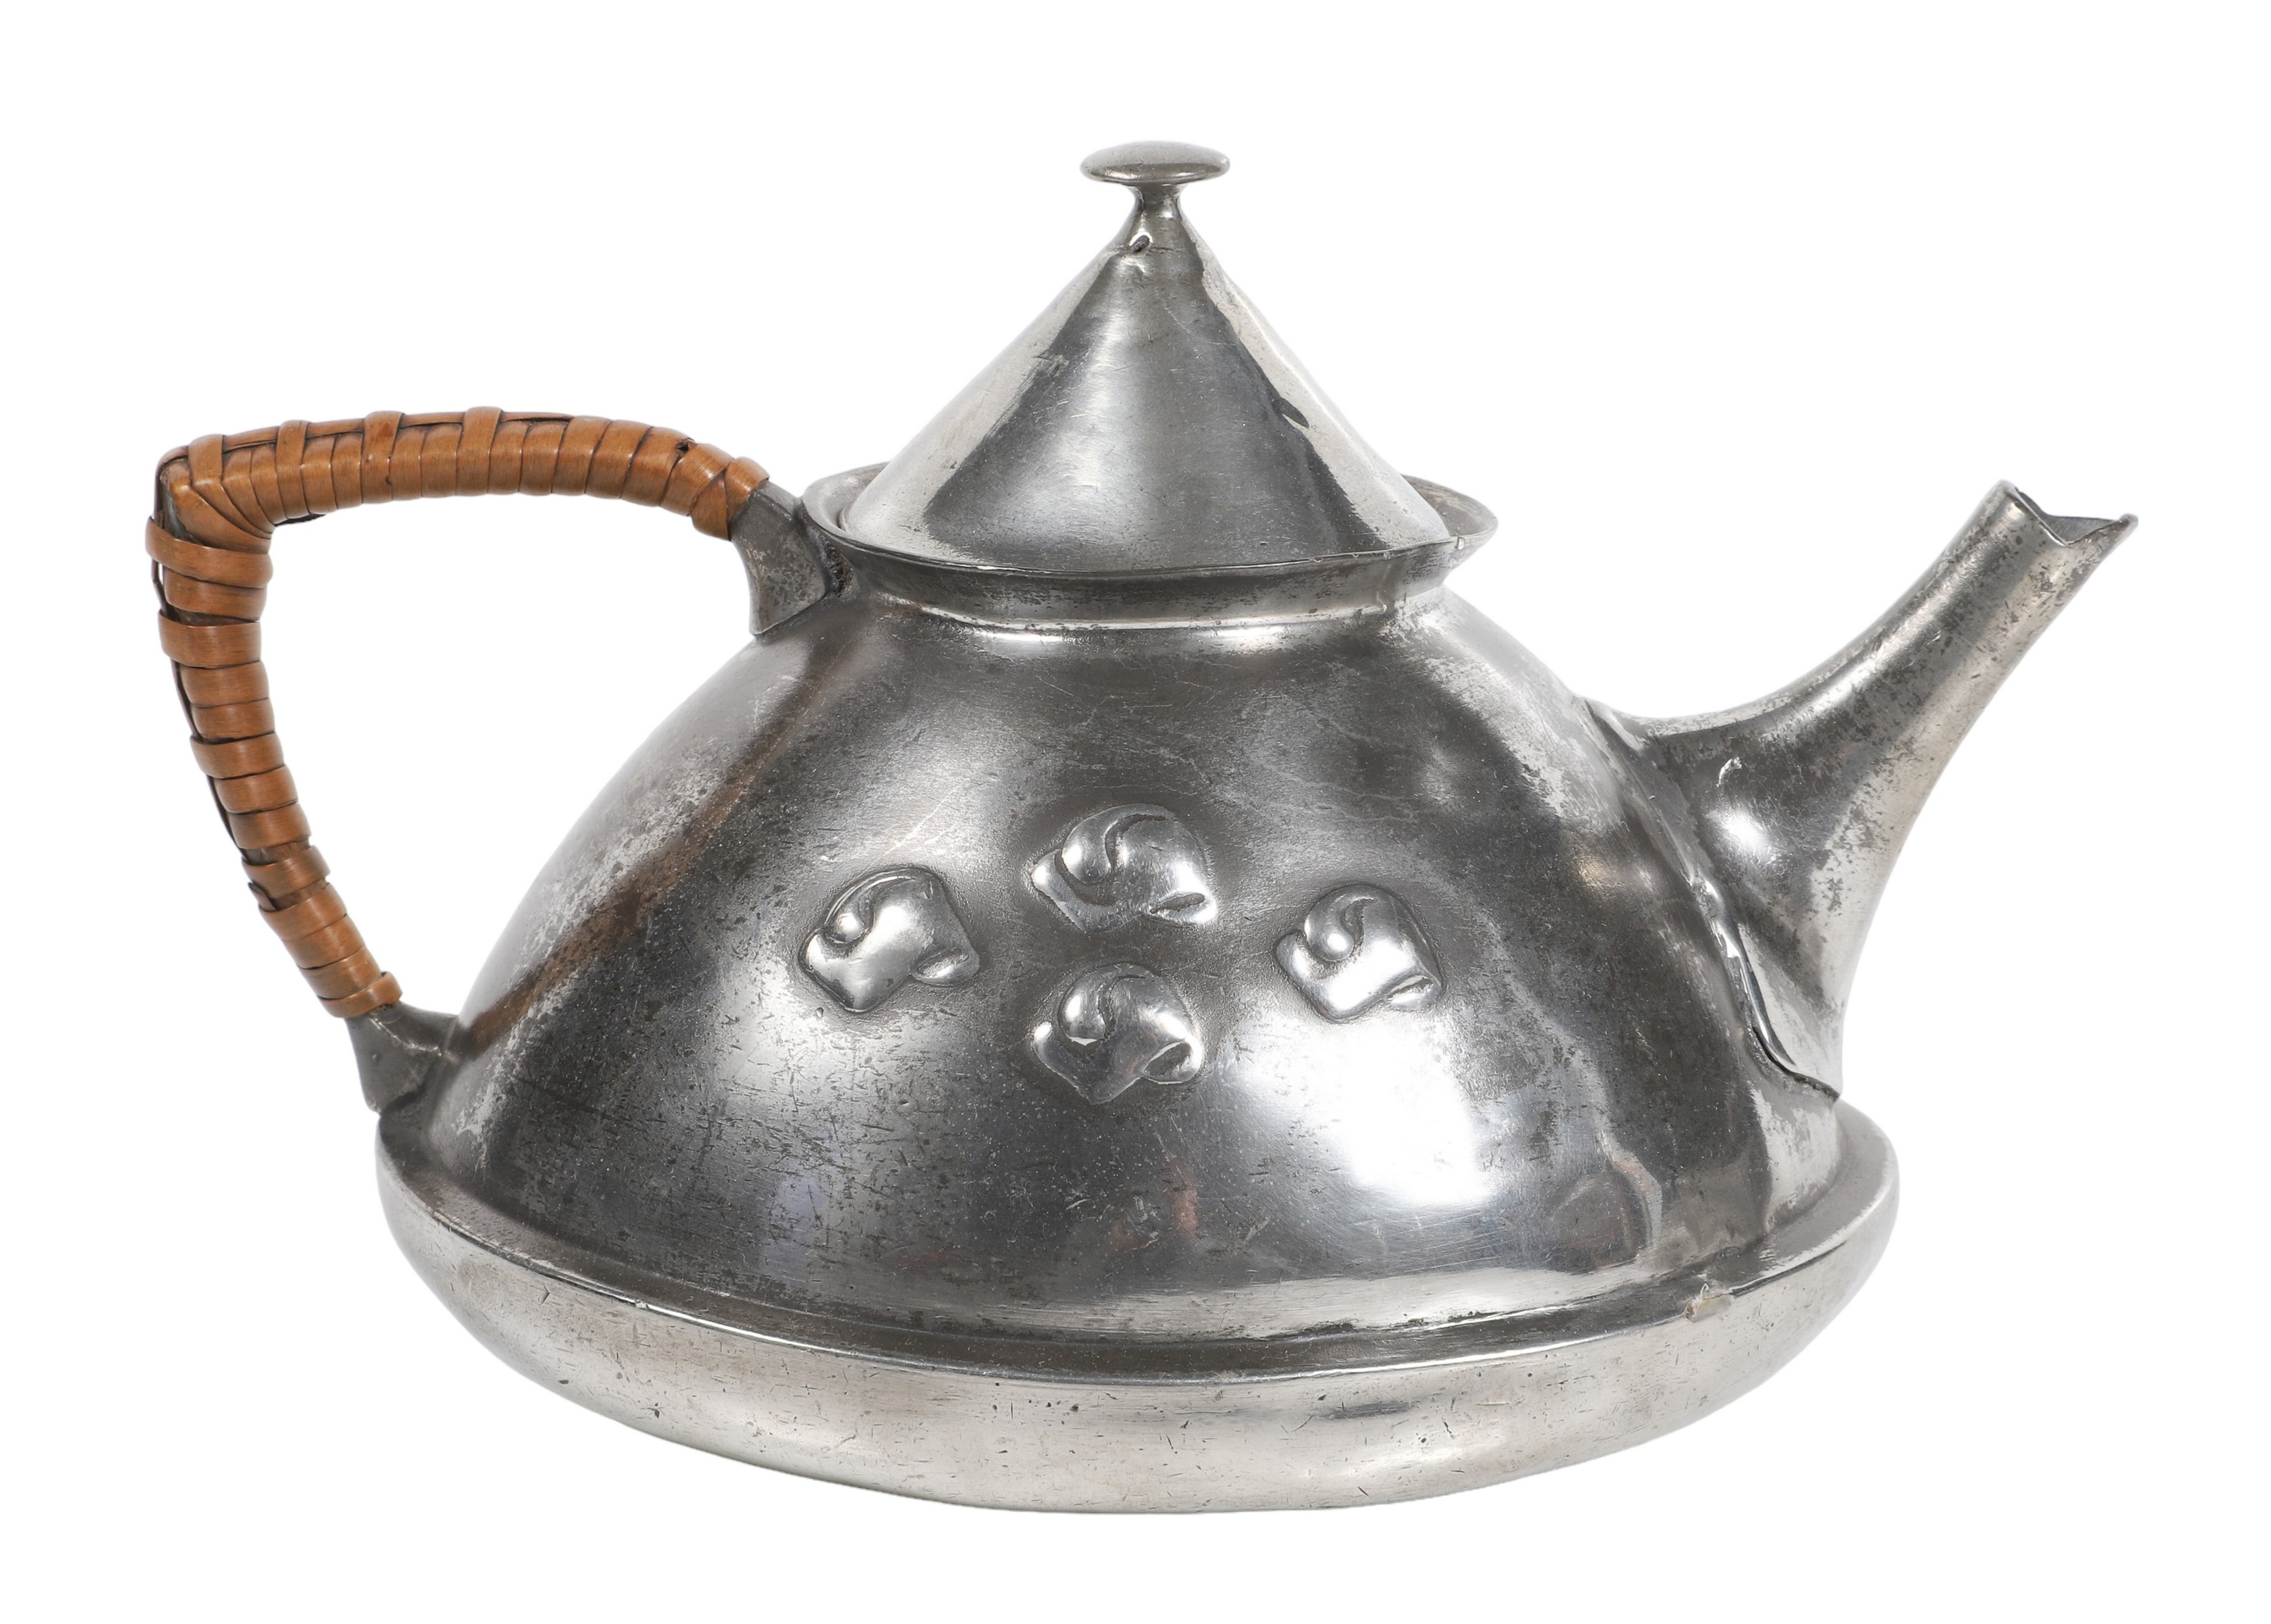 A teapot by Archibald Knox for